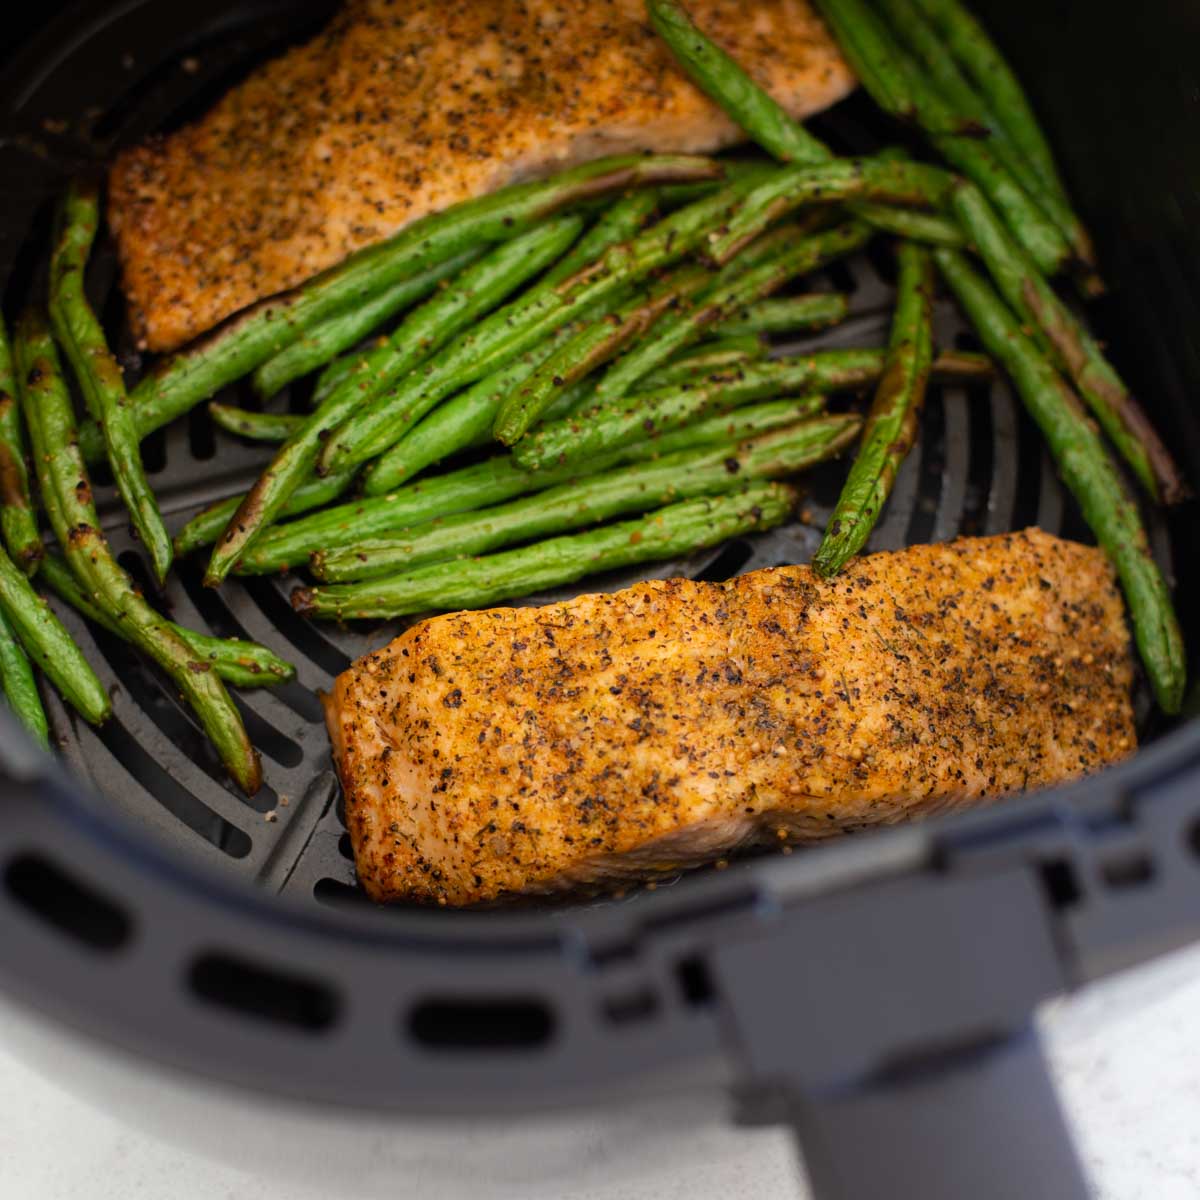 Two salmon filets are surrounded by fresh green beans in an air fryer basket.